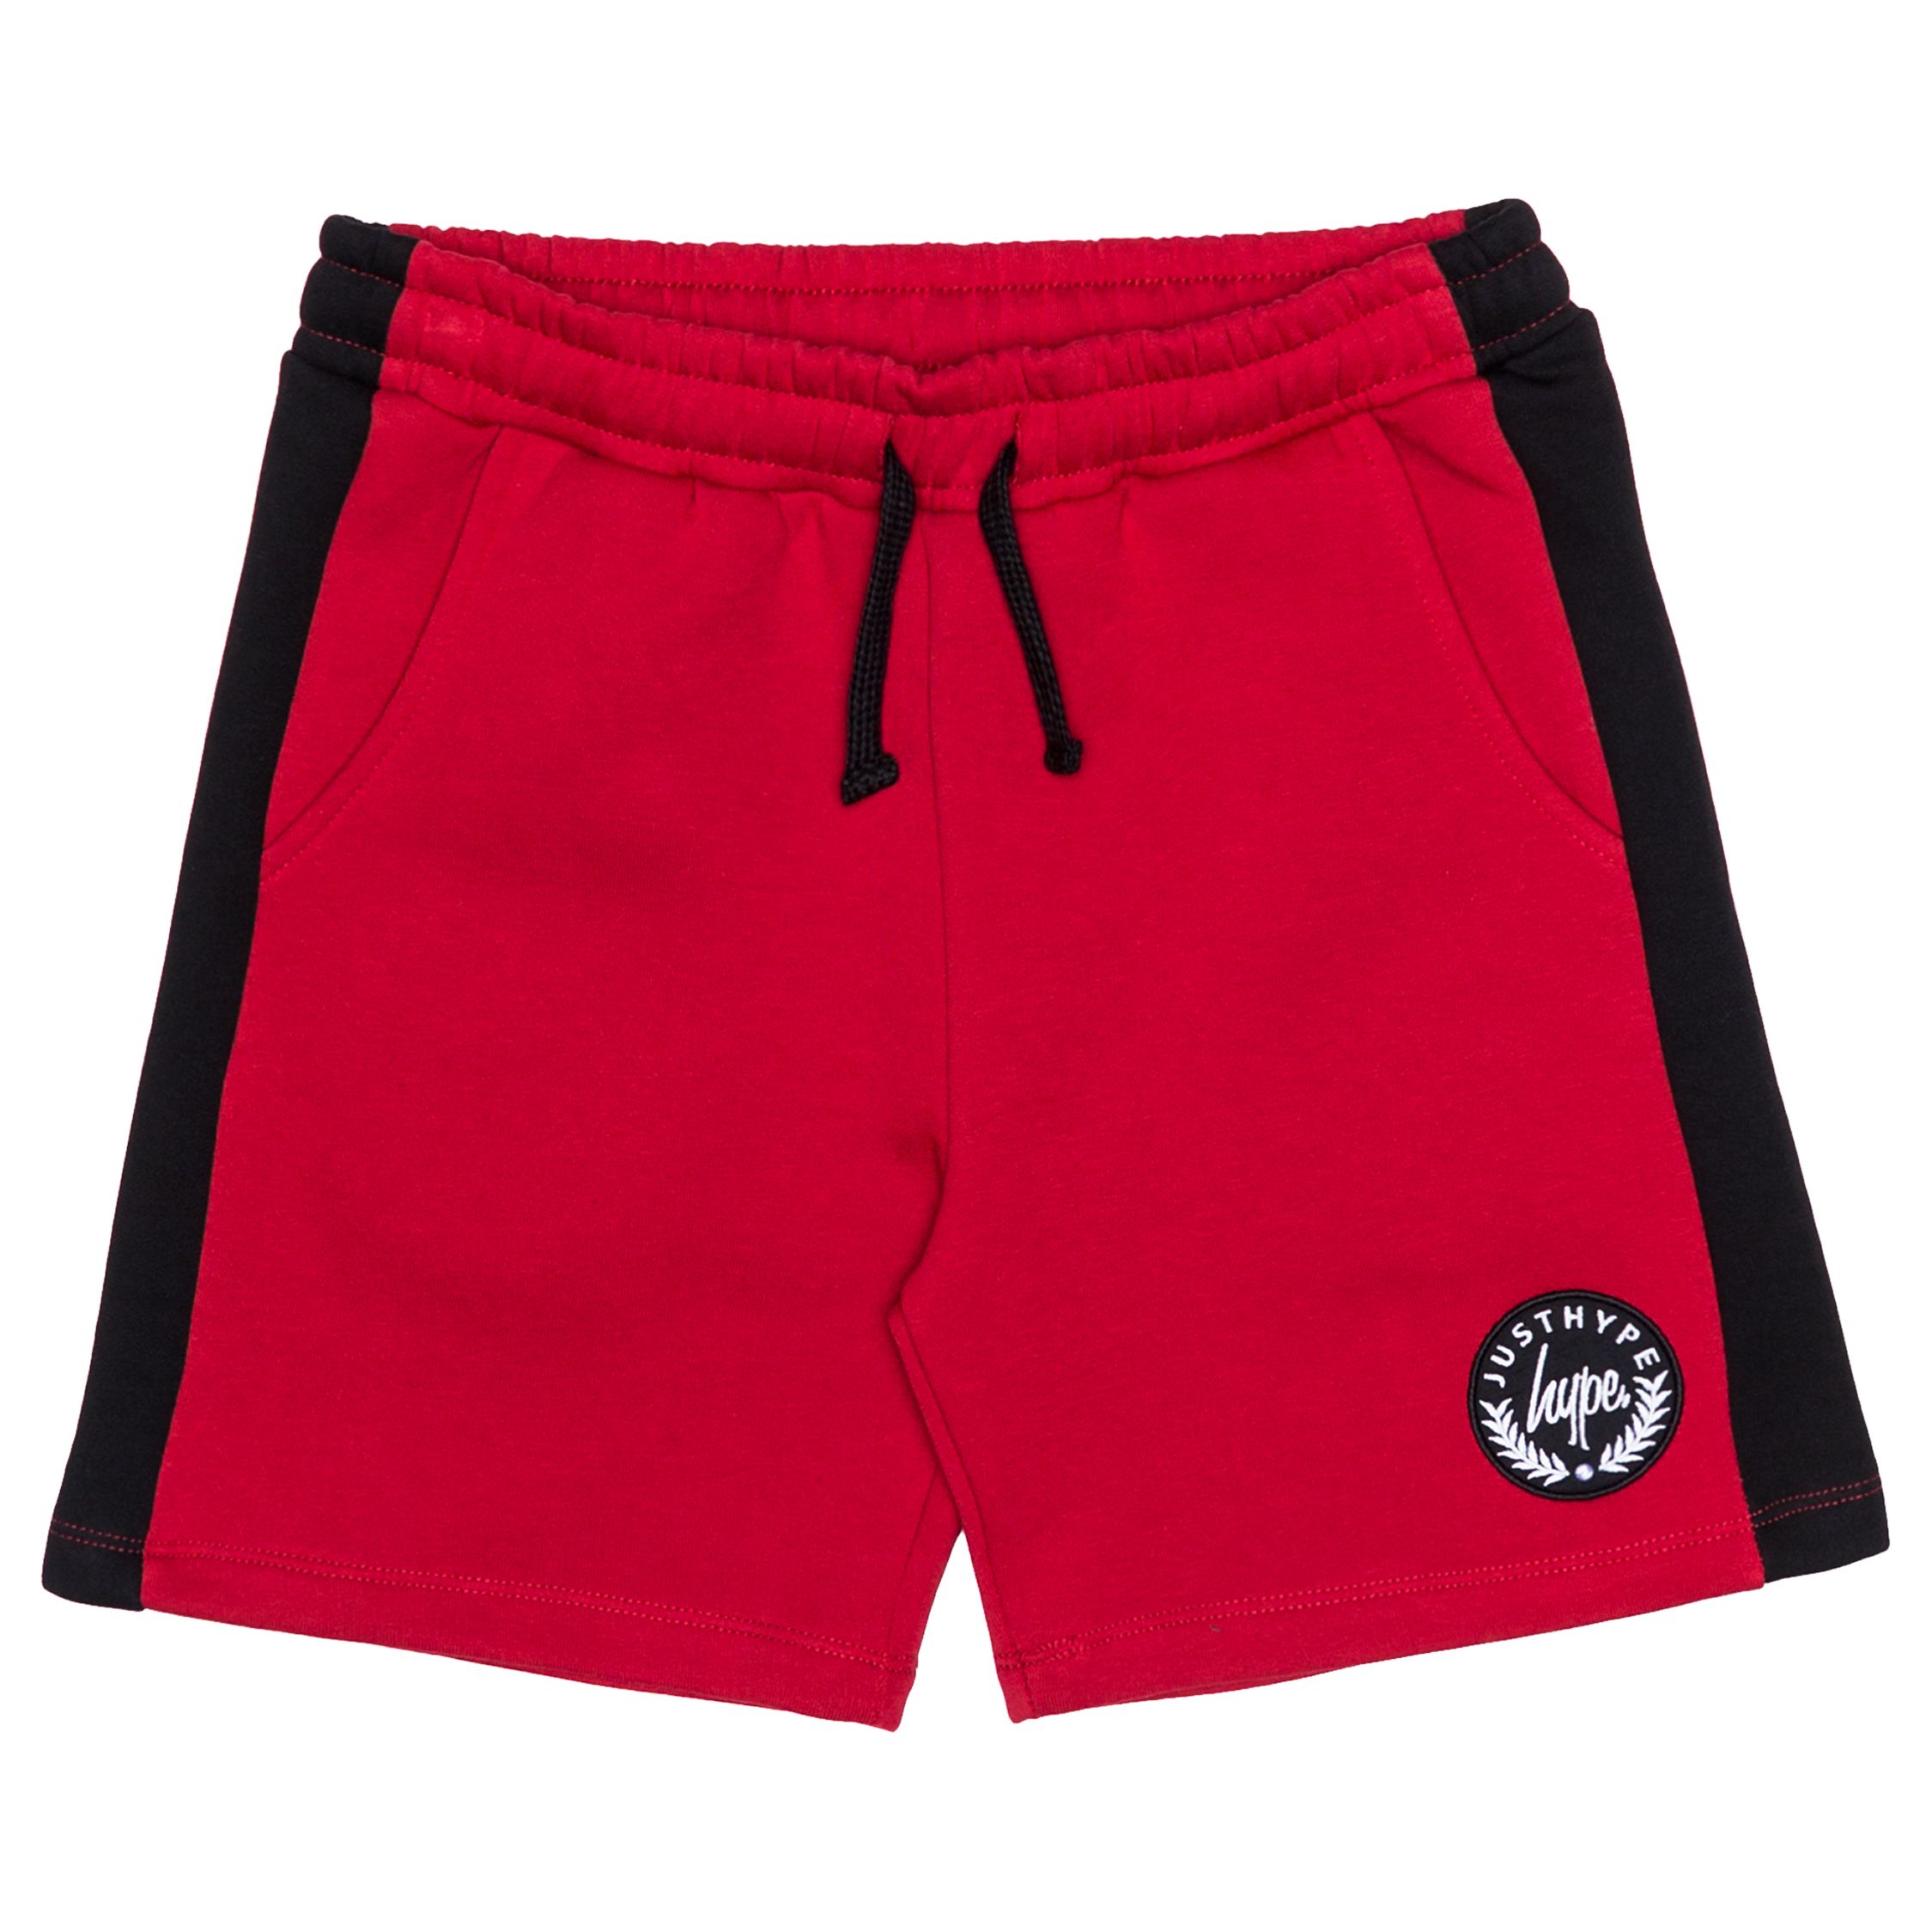 Hype Boys' Crest Logo Shorts, Red, 11-12 years